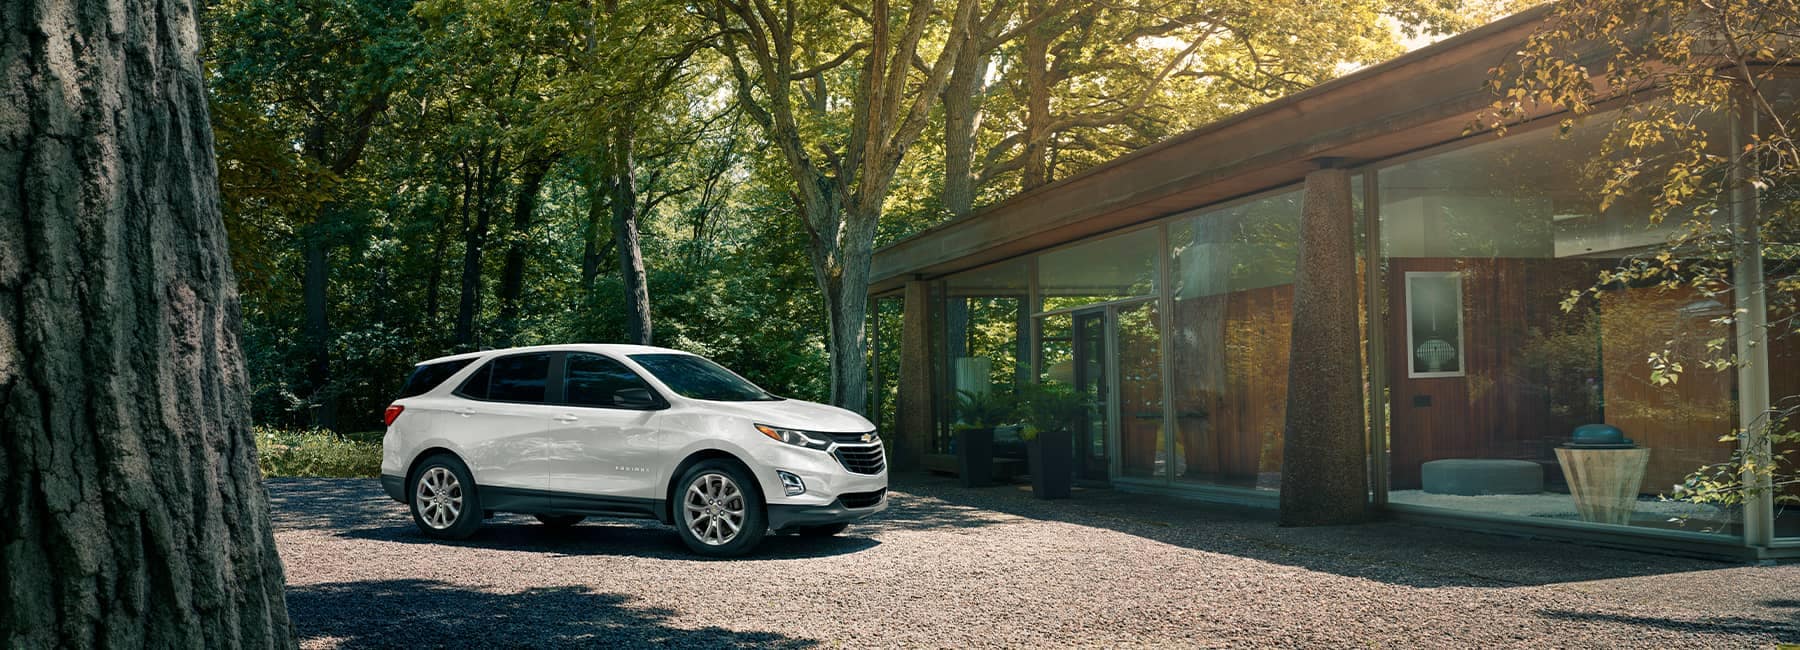 A White 2021 Chevrolet Equinox parked in front of a modern house tucked in the woods